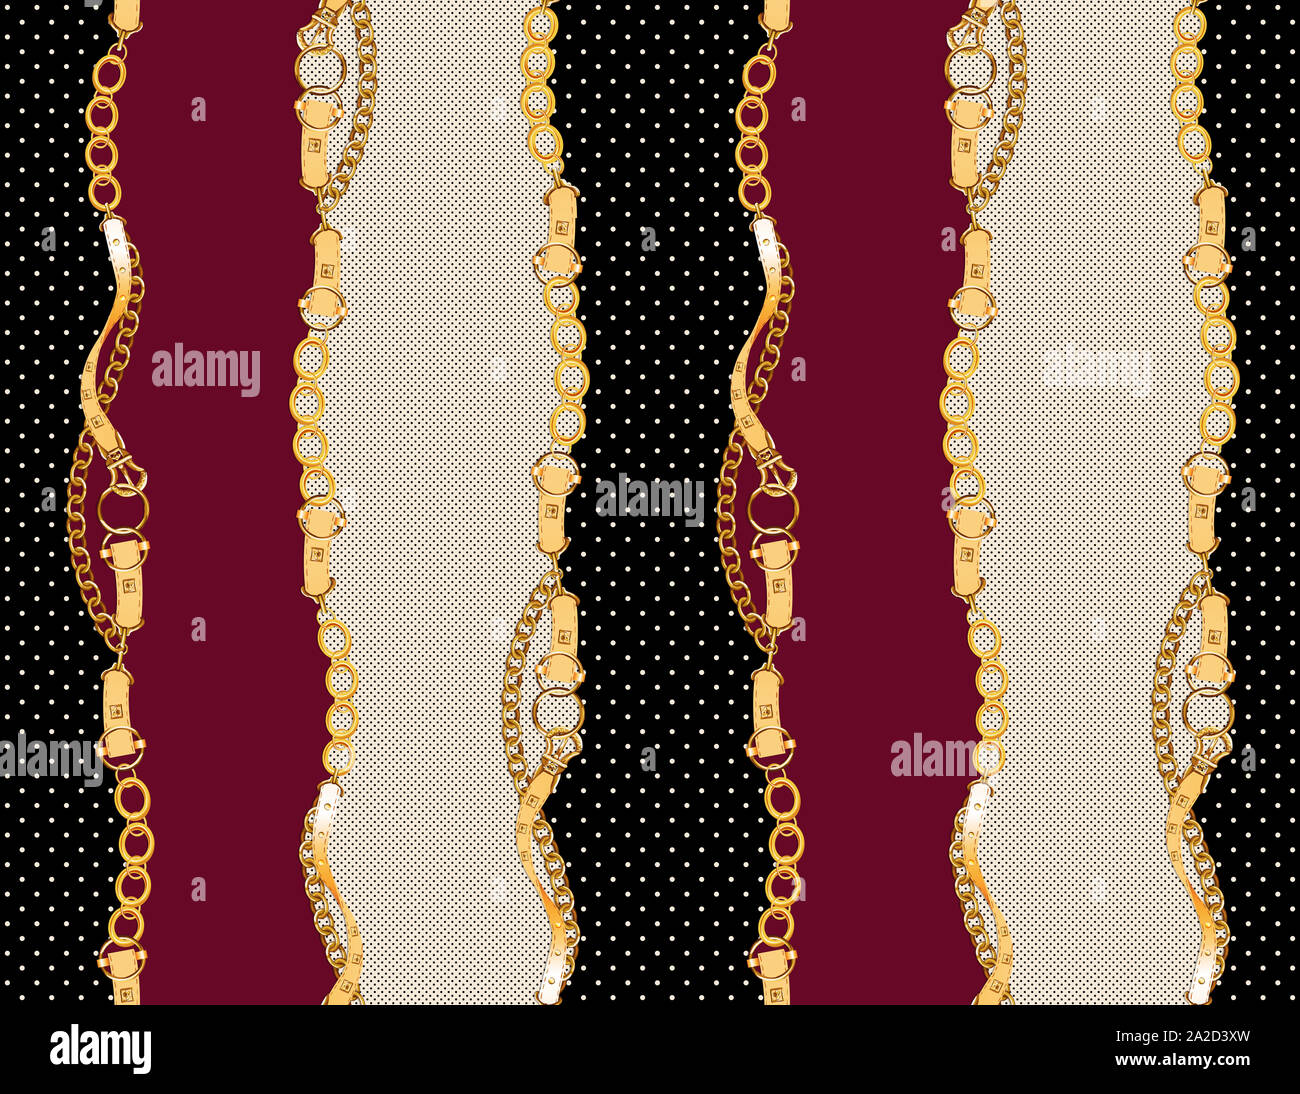 Seamless antique golden belts and stripes. vintage colors, black background with white dots, modern pattern with dark red and light colors. Ready for Stock Photo